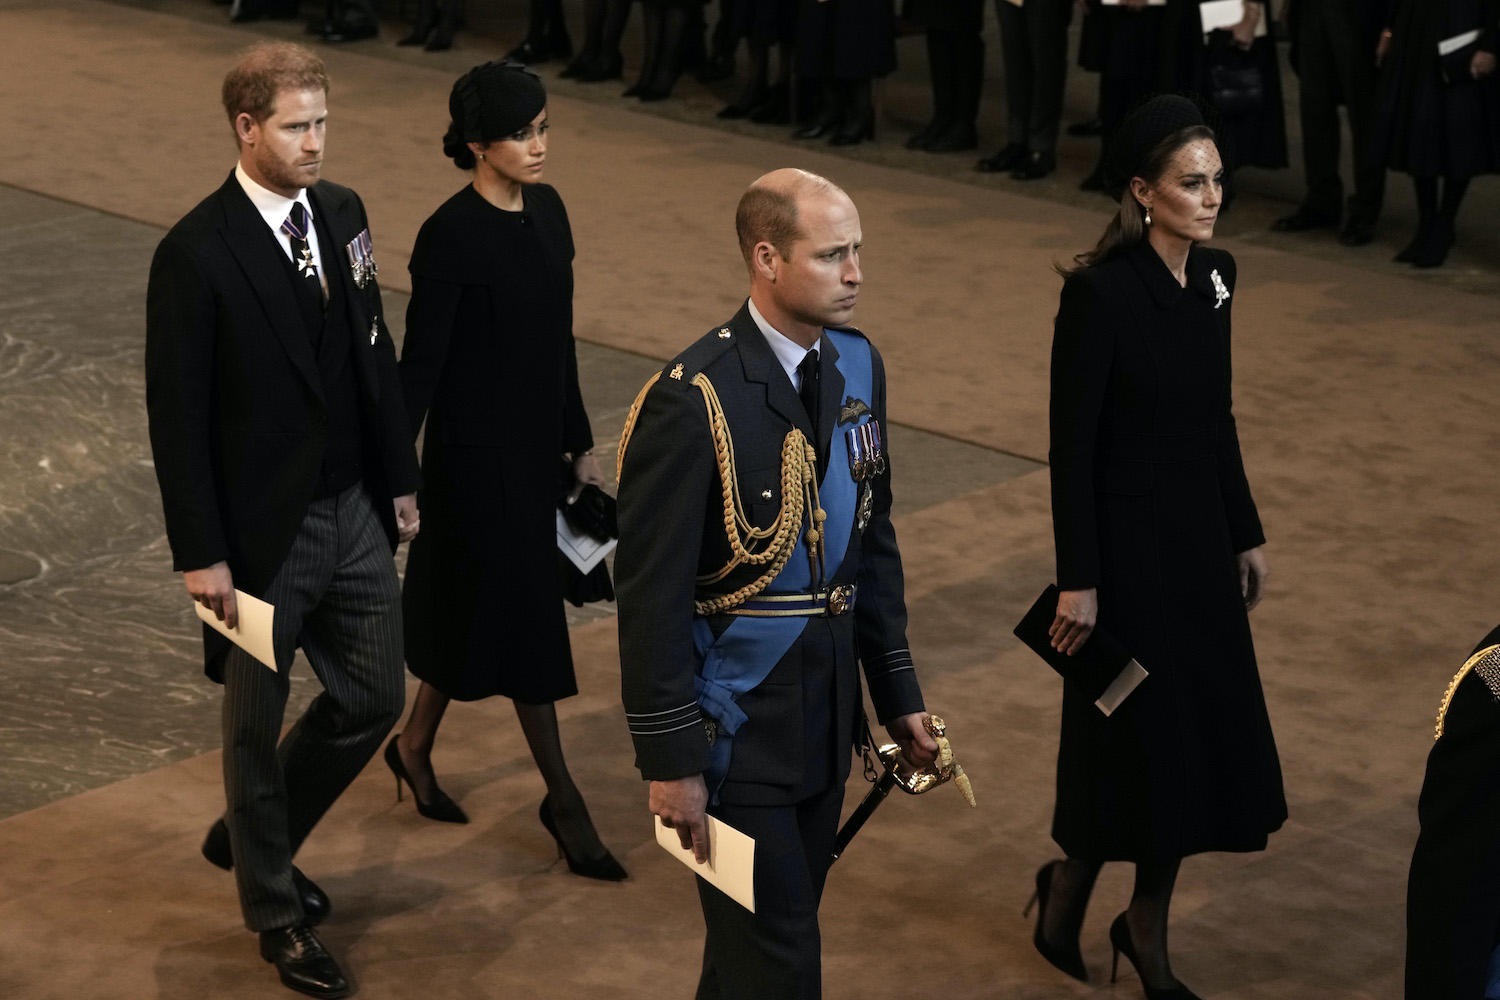 Body Language Expert Analyzes Prince Harry and Meghan Markle’s ‘Emotionally Impulsive Gesture’ at Queen’s Westminster Service